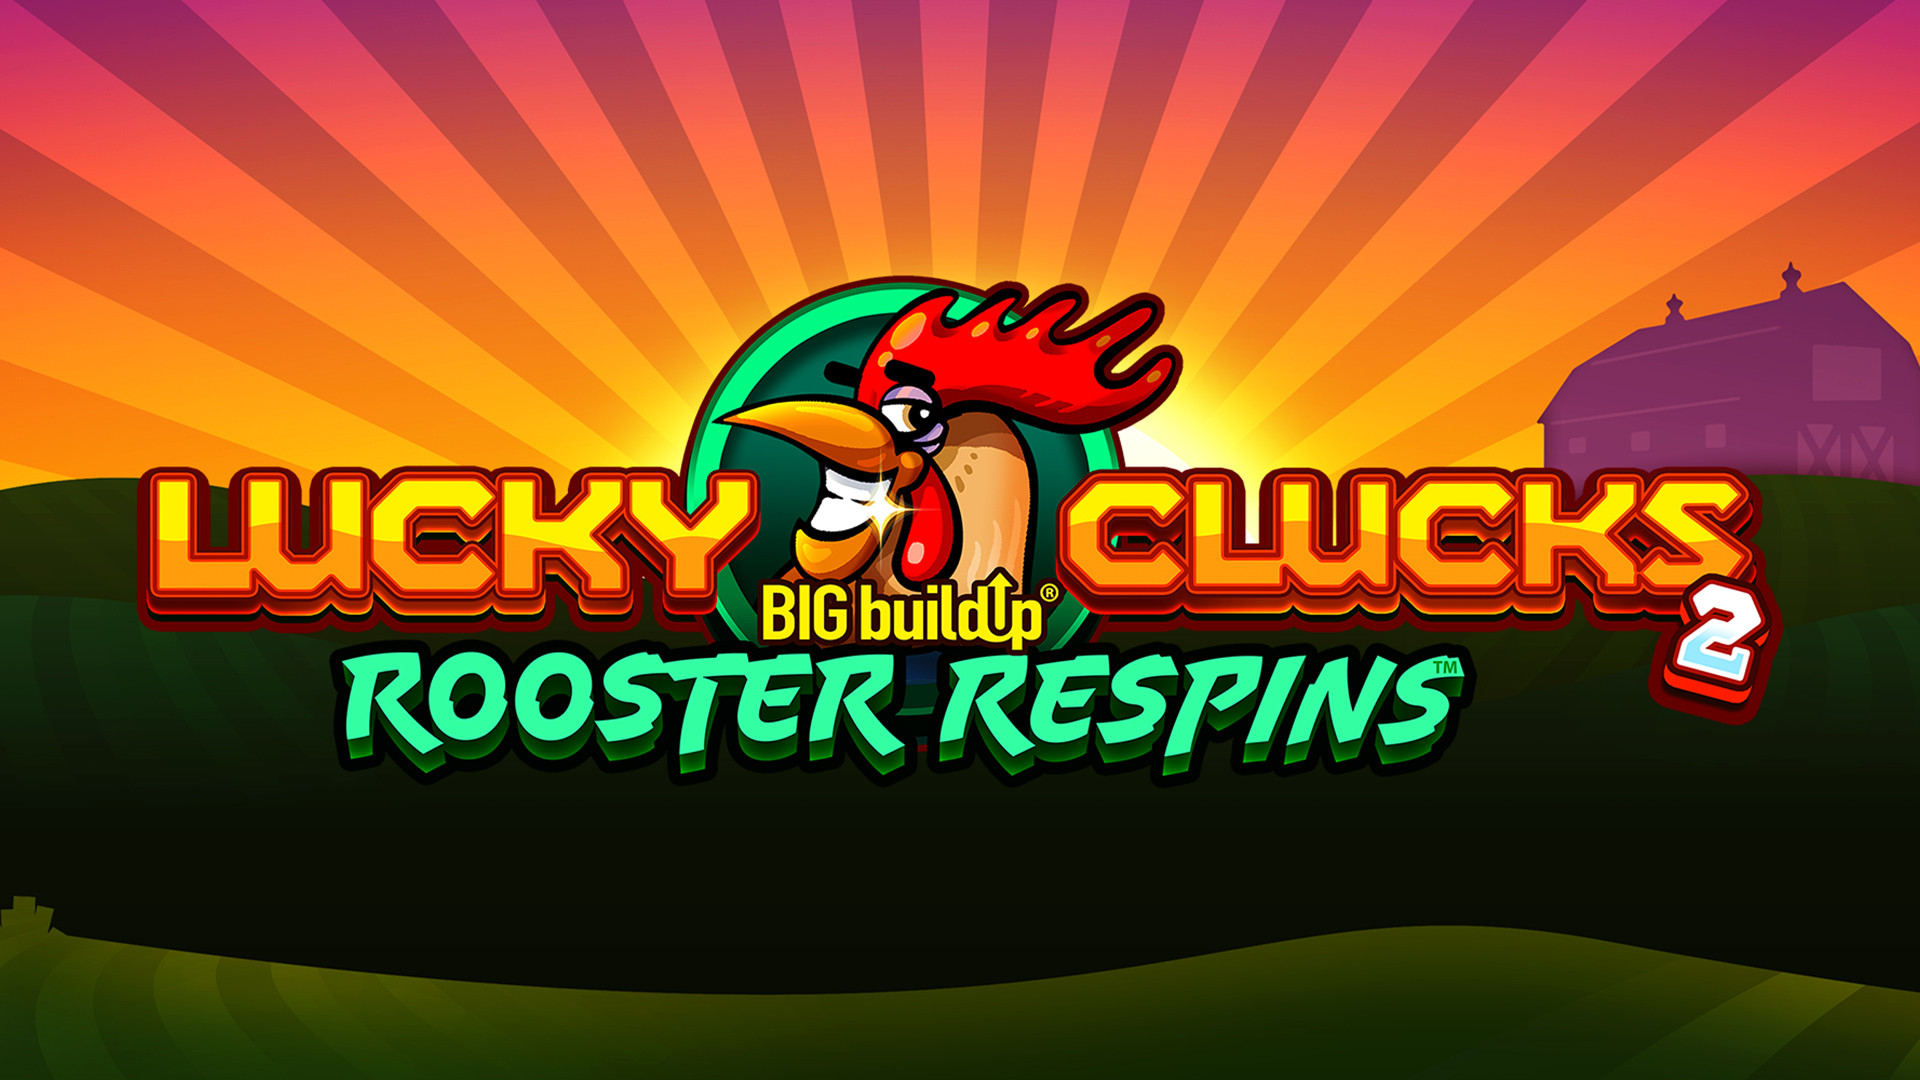 Lucky Clucks 2: Rooster Respins